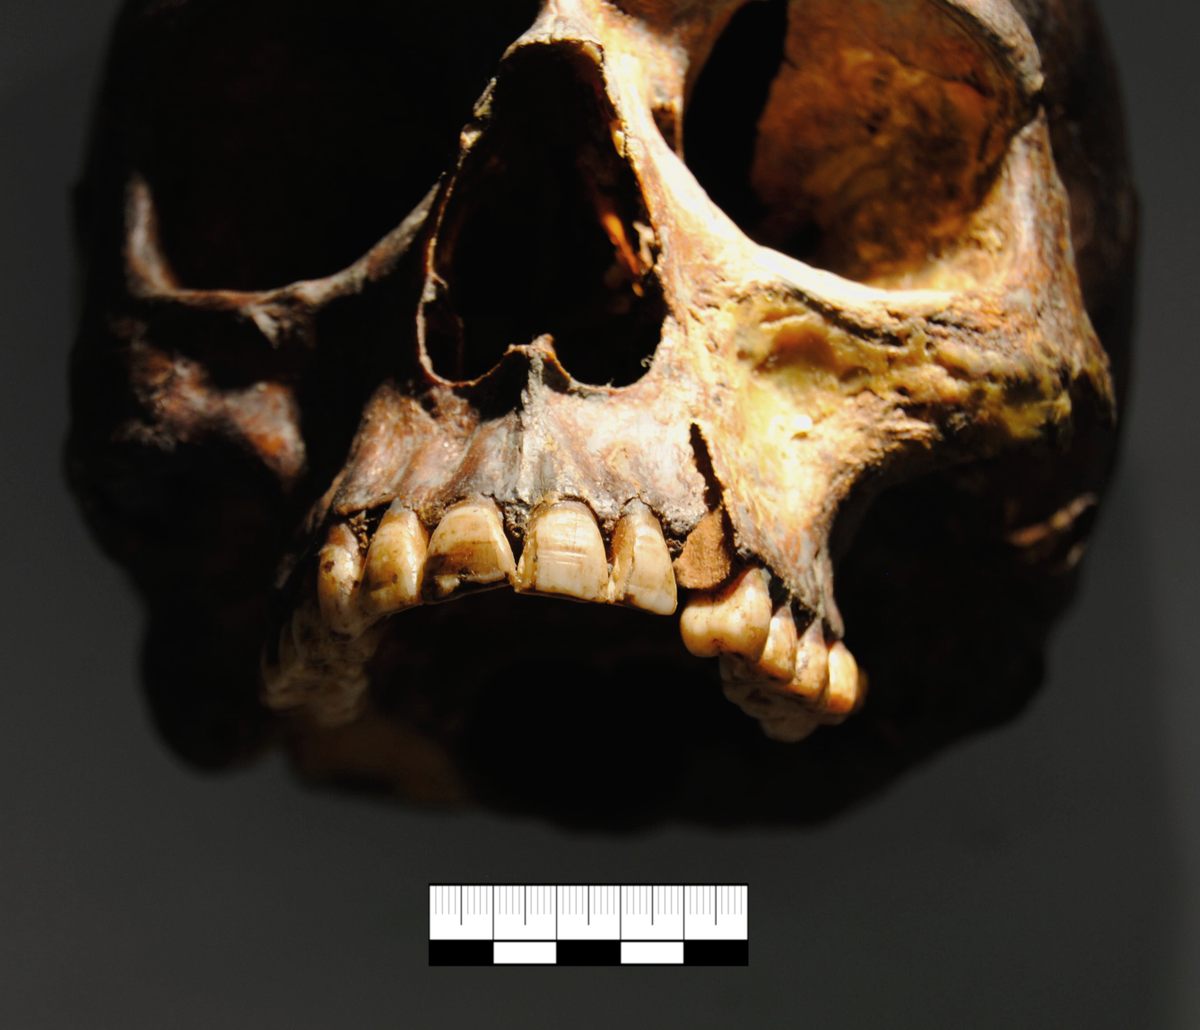 Filing lines onto teeth is well-known when it comes to Vikings, but skull modification is new.